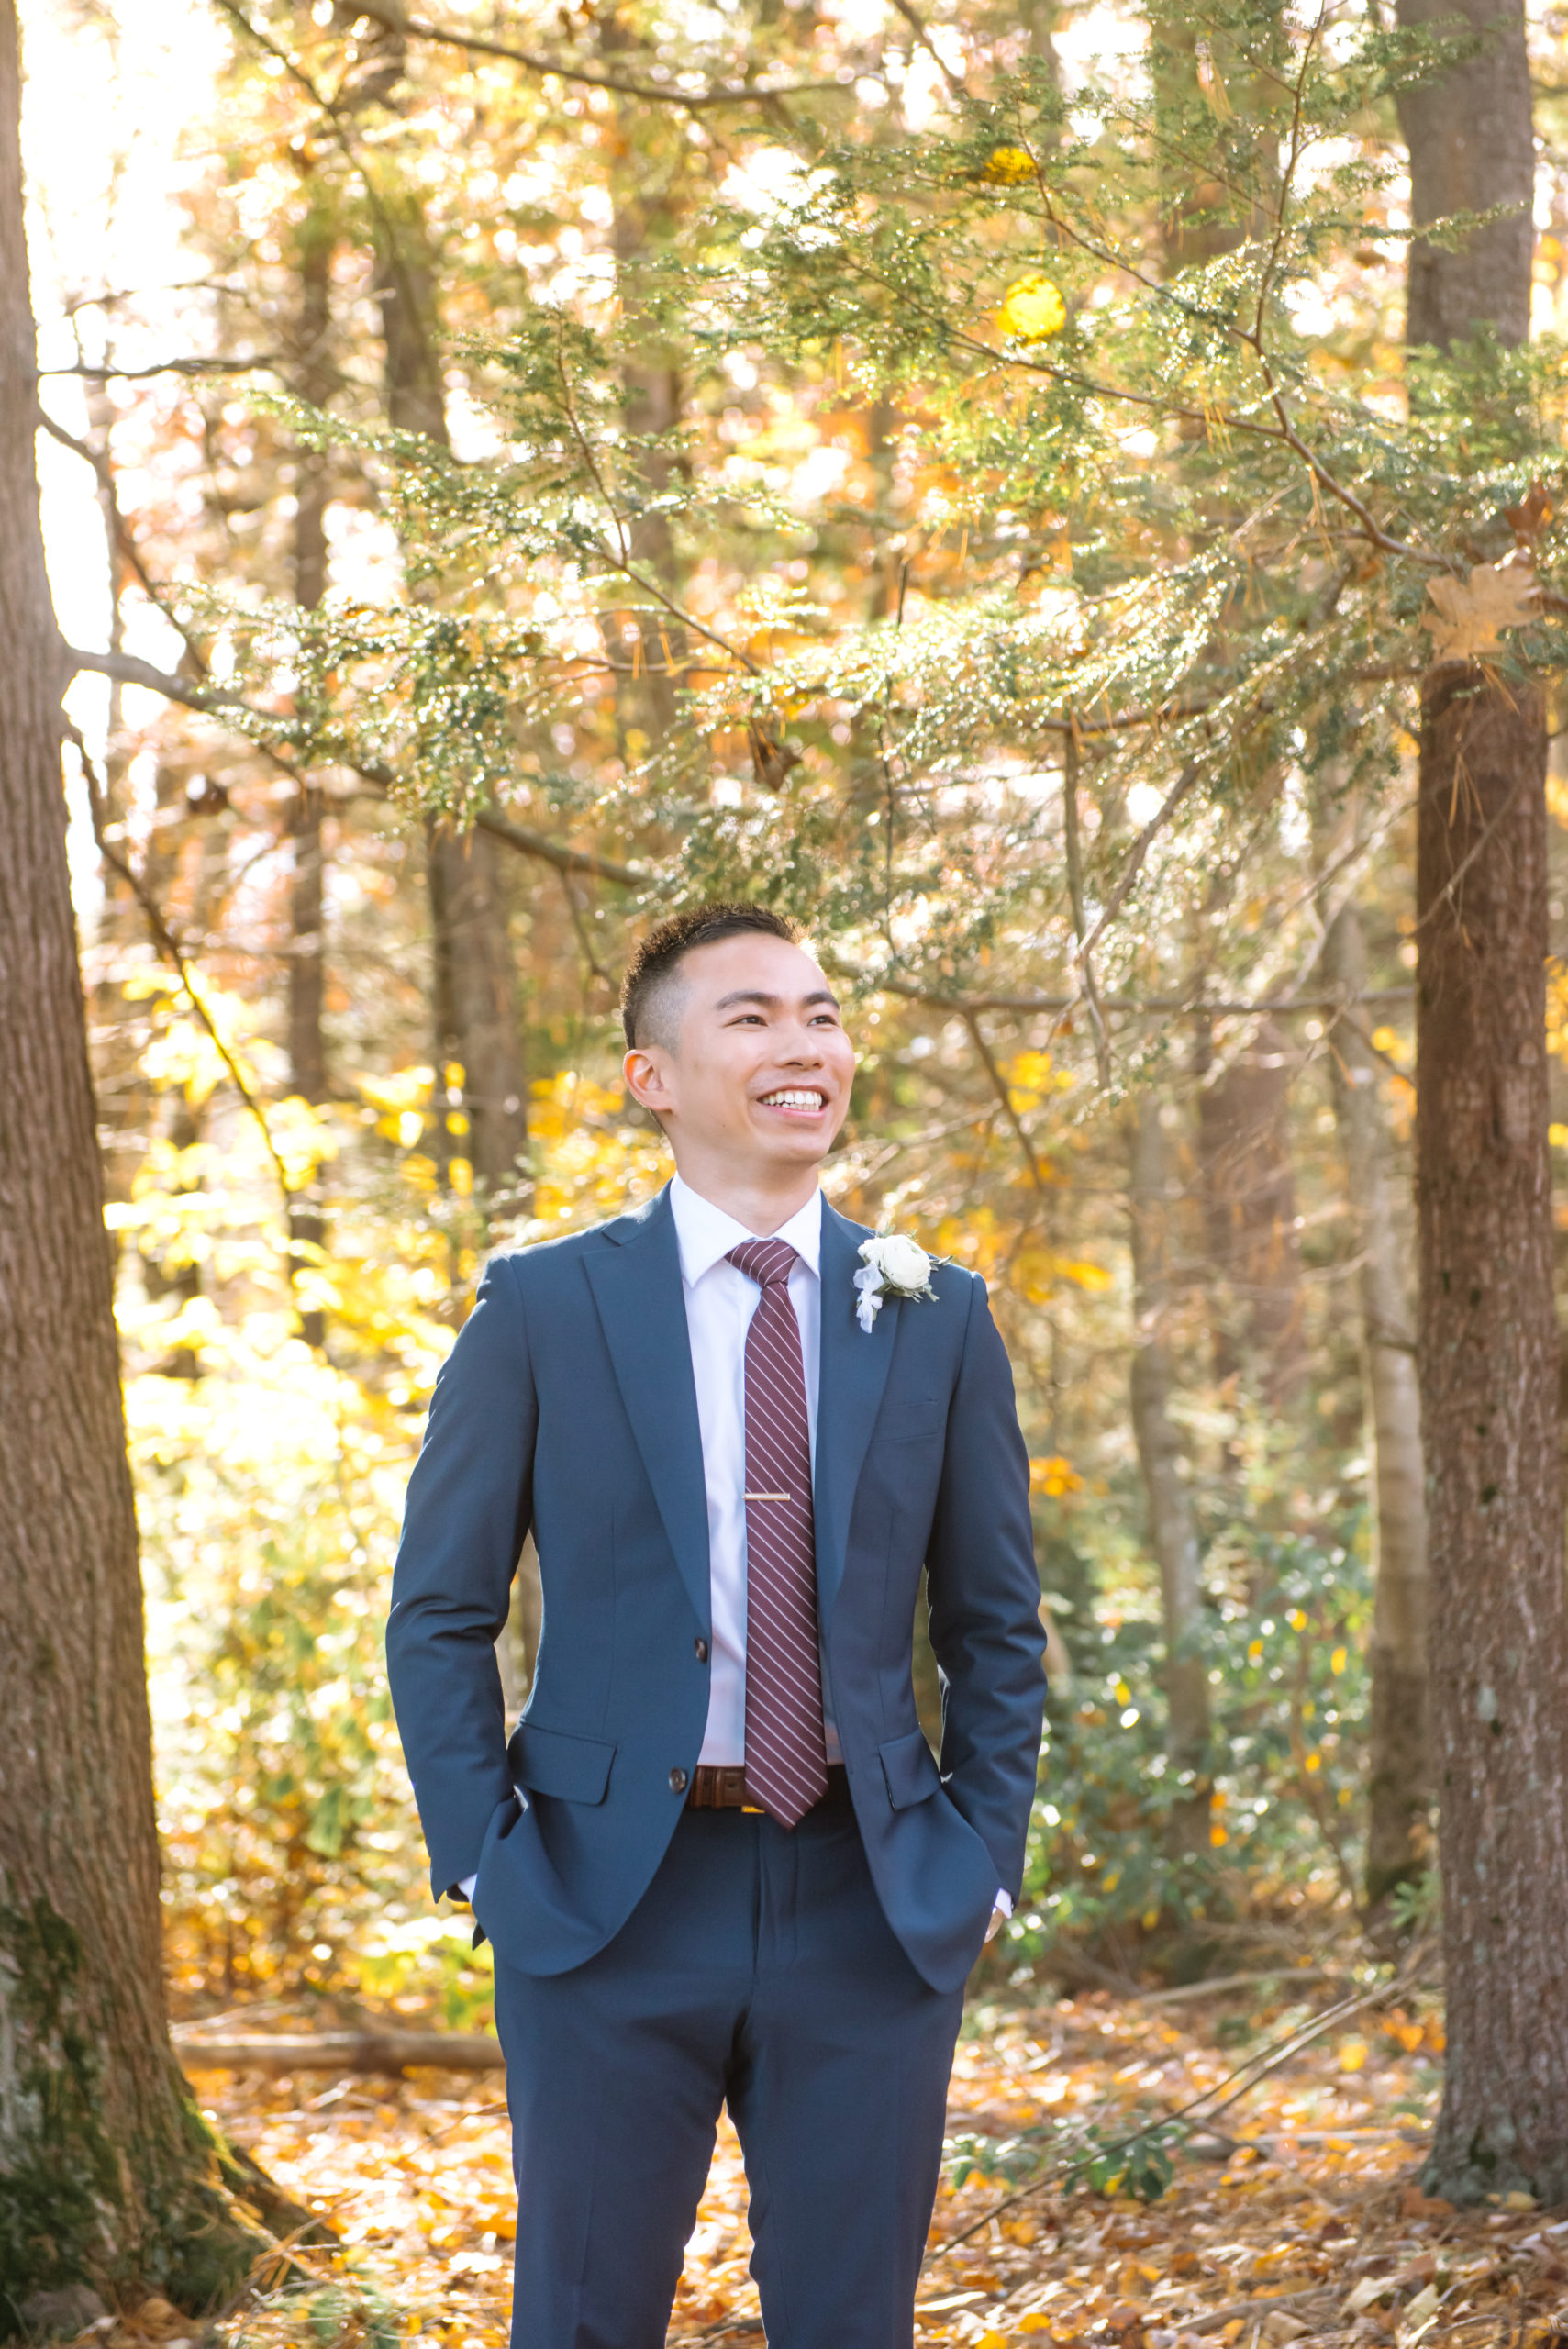 Torso portrait of one of the grooms smiling and looking up and to his left off camera. He is dressed in a dark blue suit with a burgundy striped tie and a white and greenery boutonniere. He is standing in an autumnal forest.